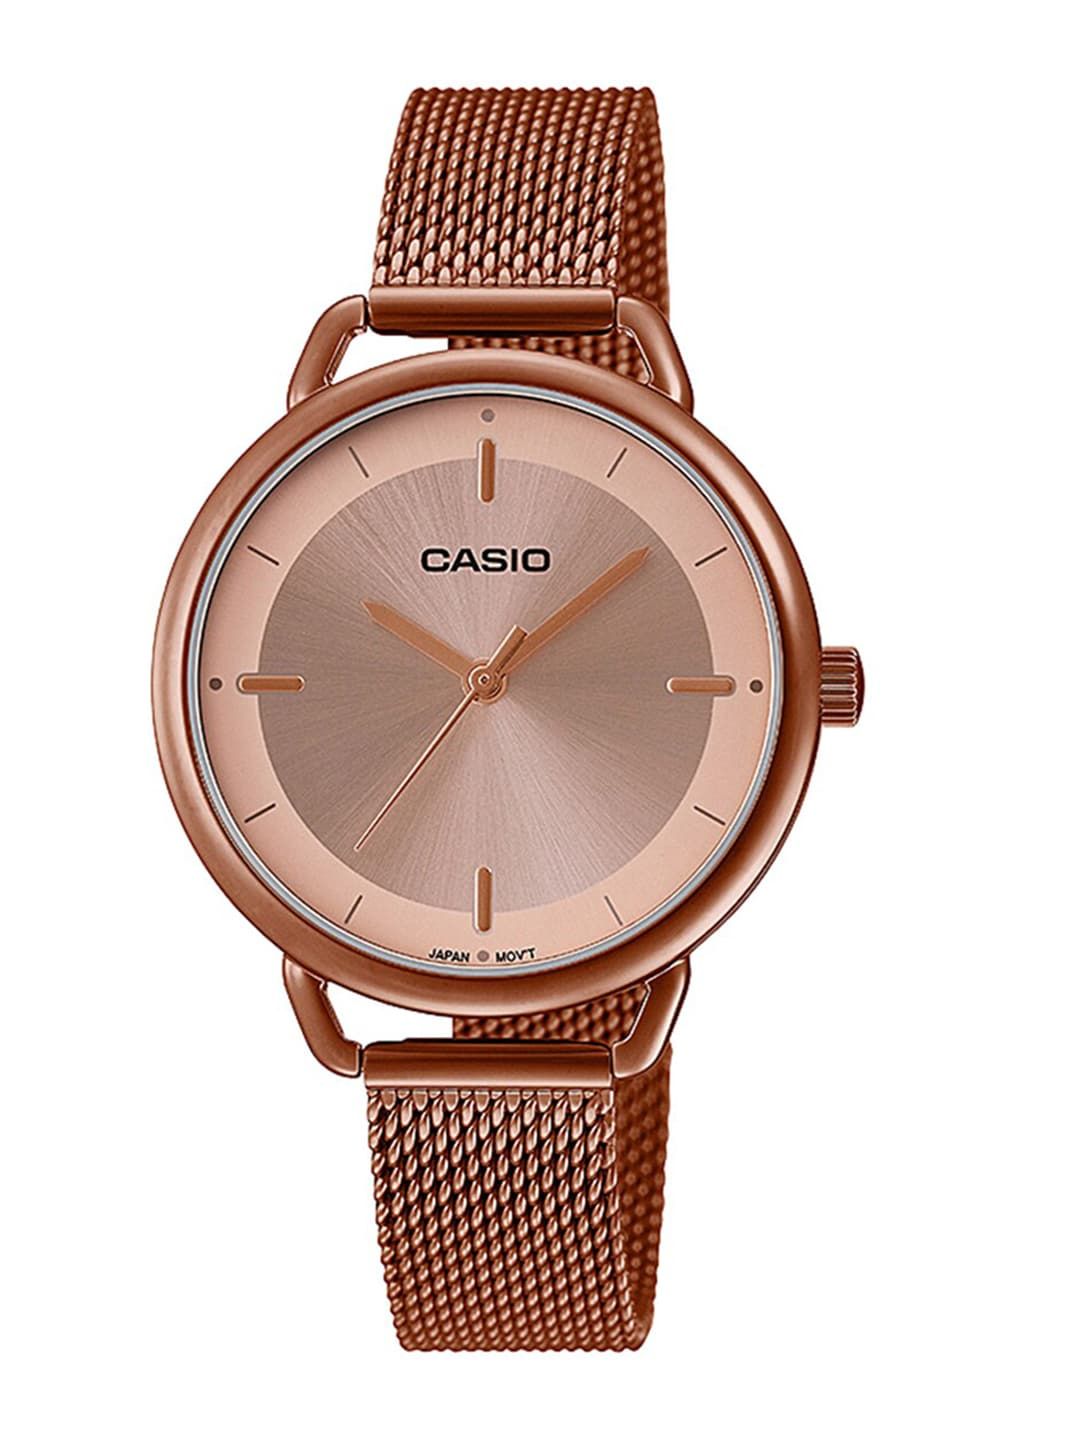 CASIO Enticer Ladies Rose Gold Analogue Watch A1799 Price in India